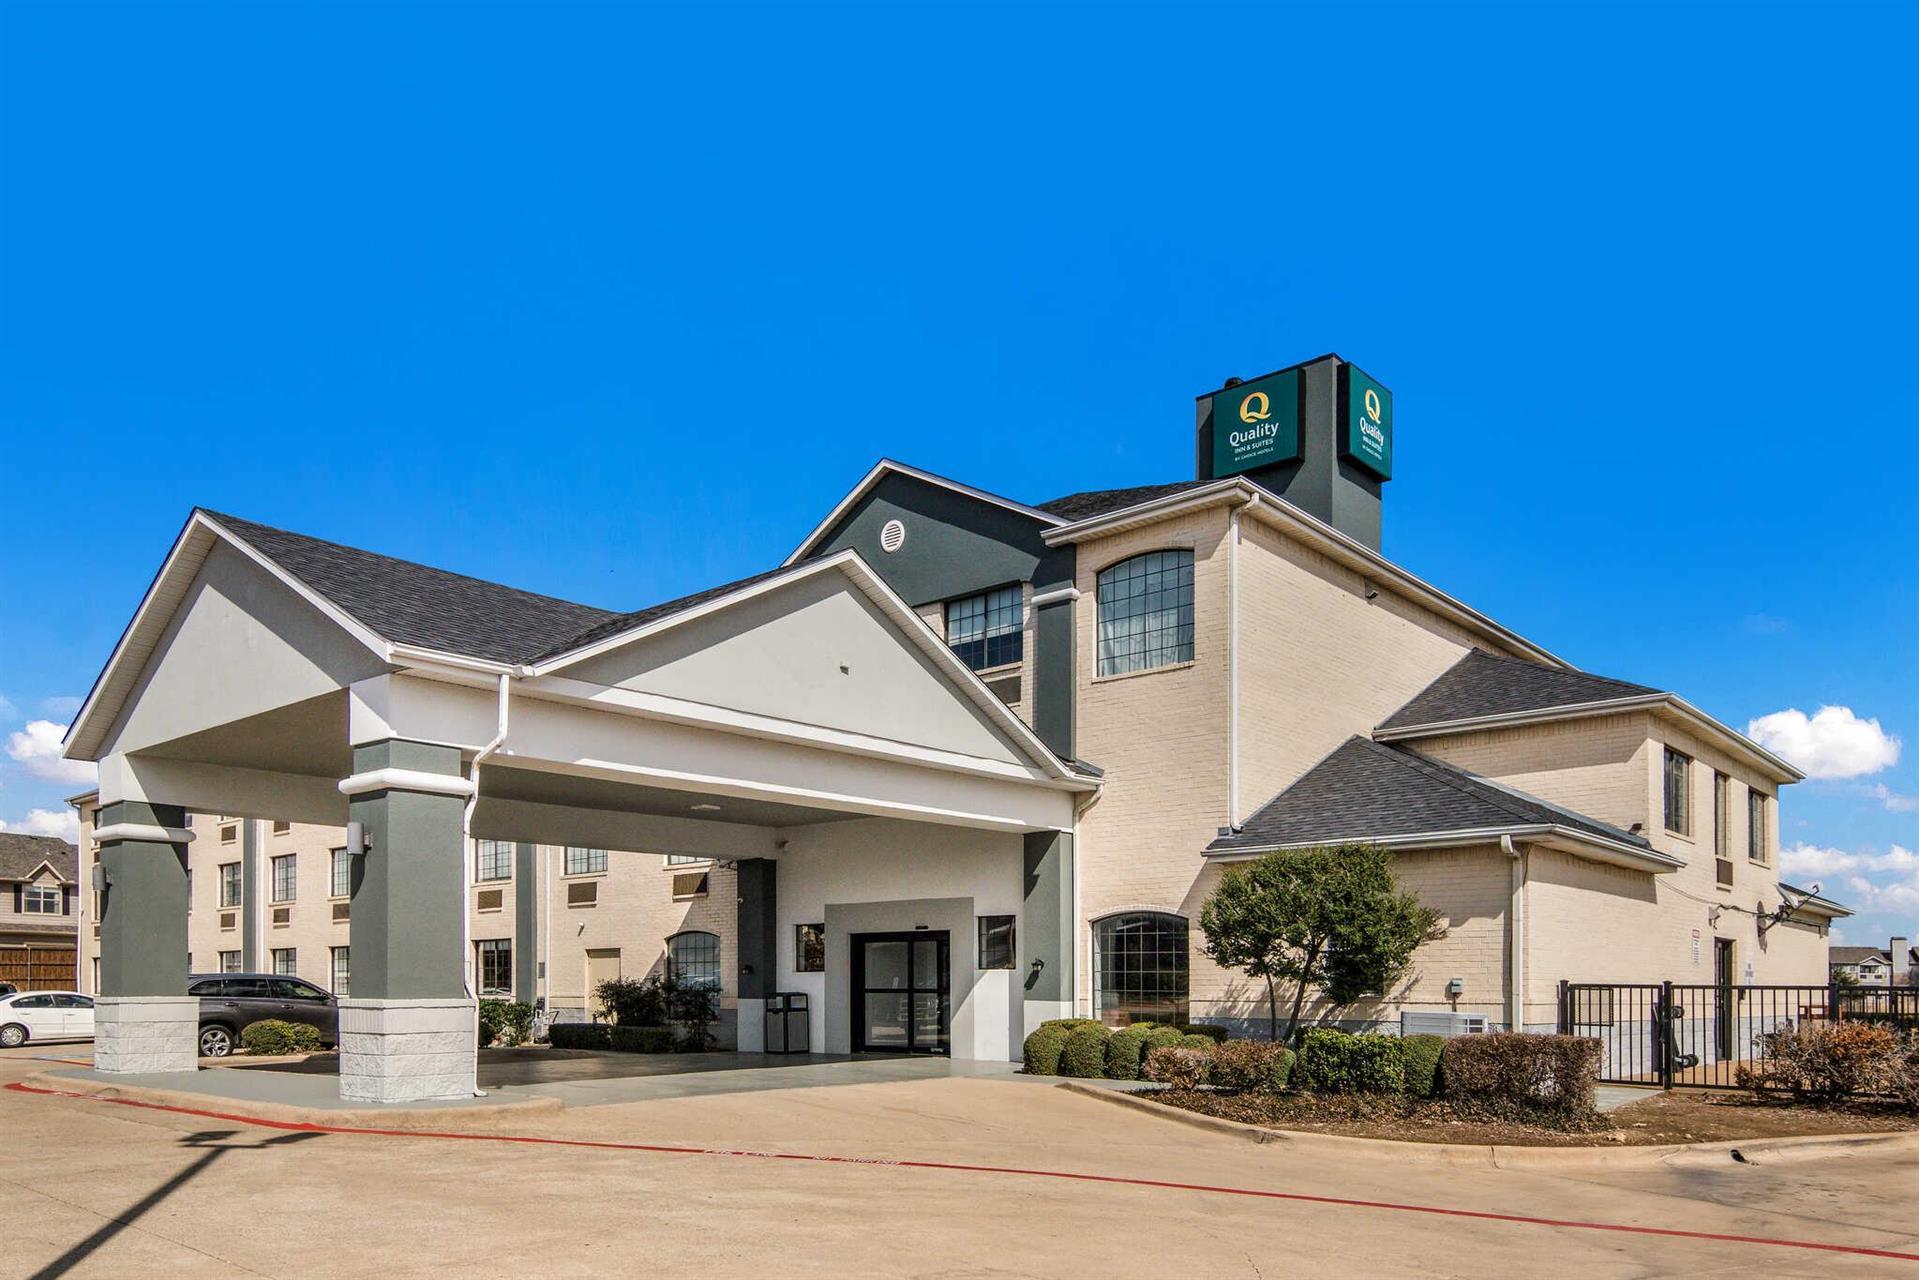 Quality Inn & Suites - Fort Worth in Fort Worth, TX